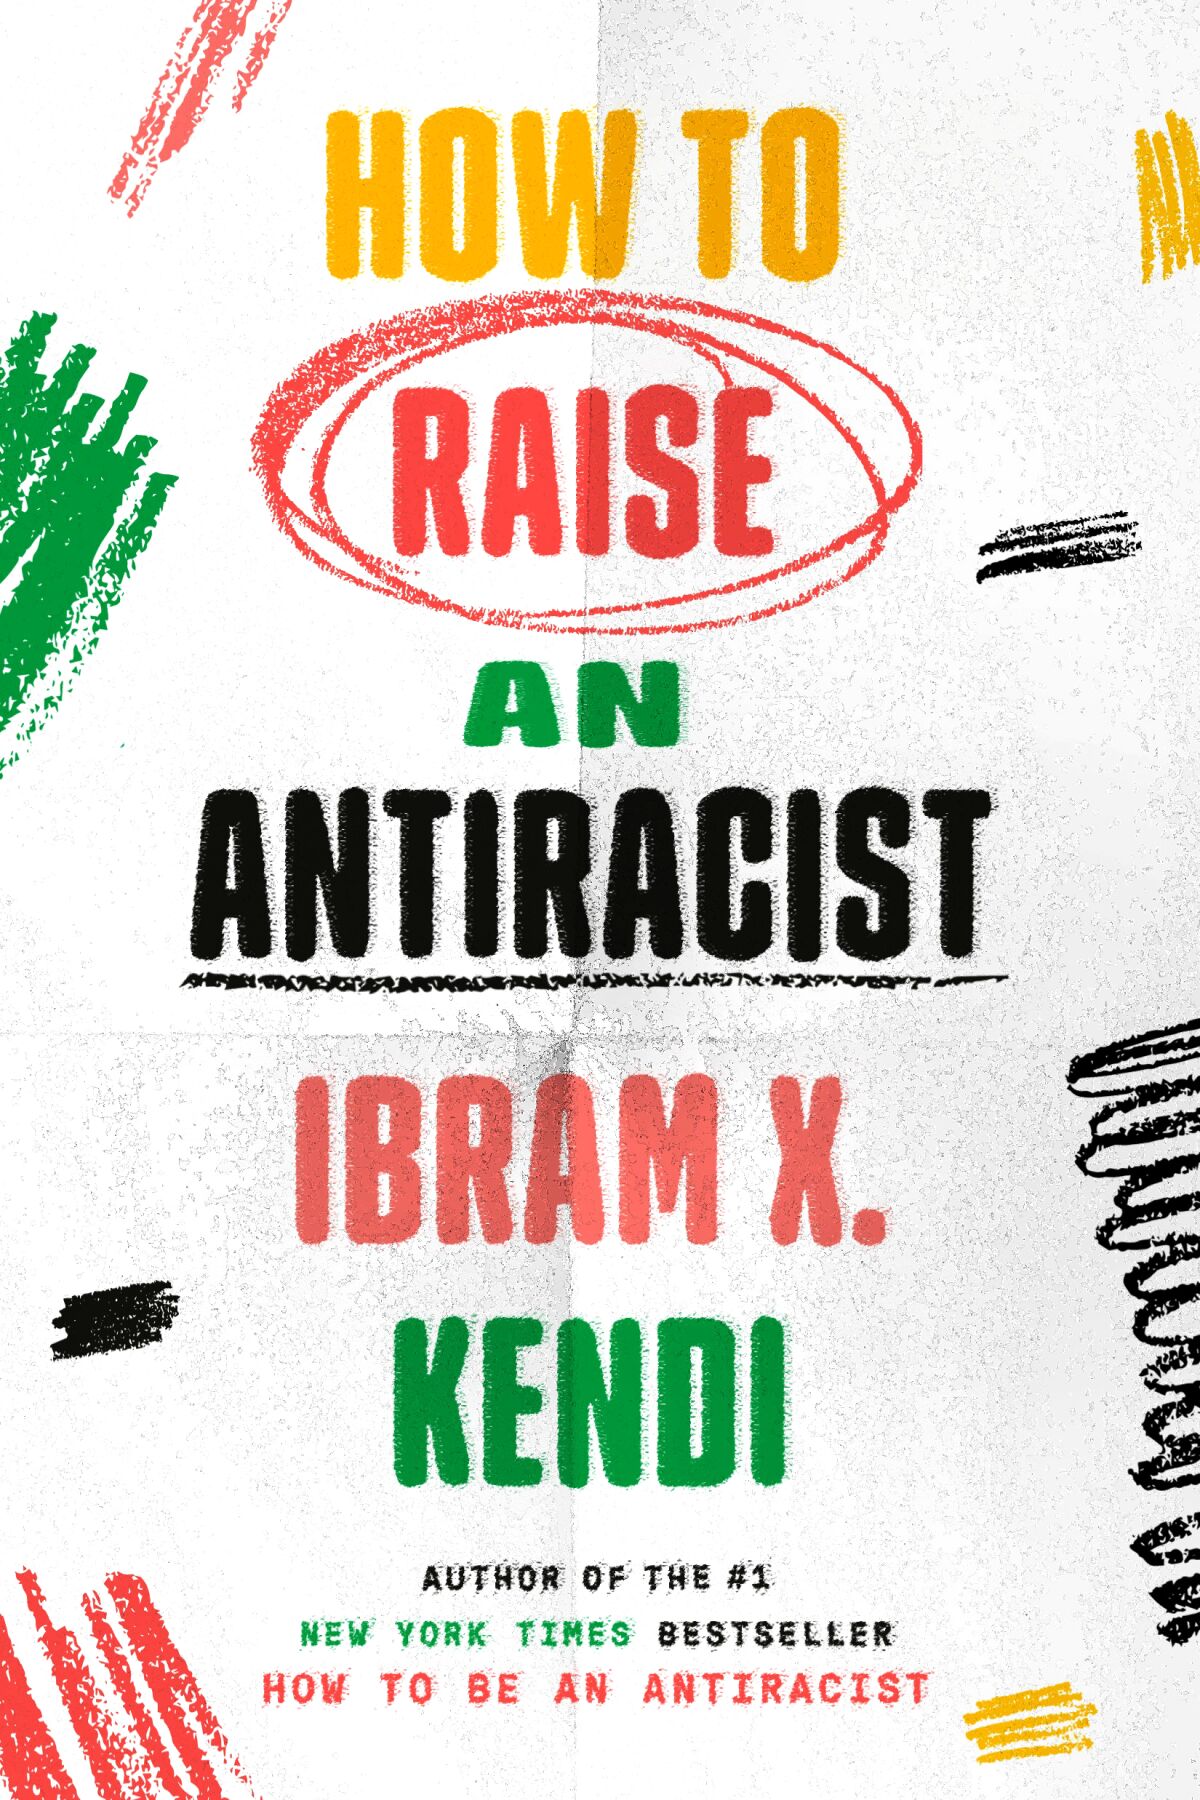 "How to Raise an Antiracist" by Ibram X. Kendi